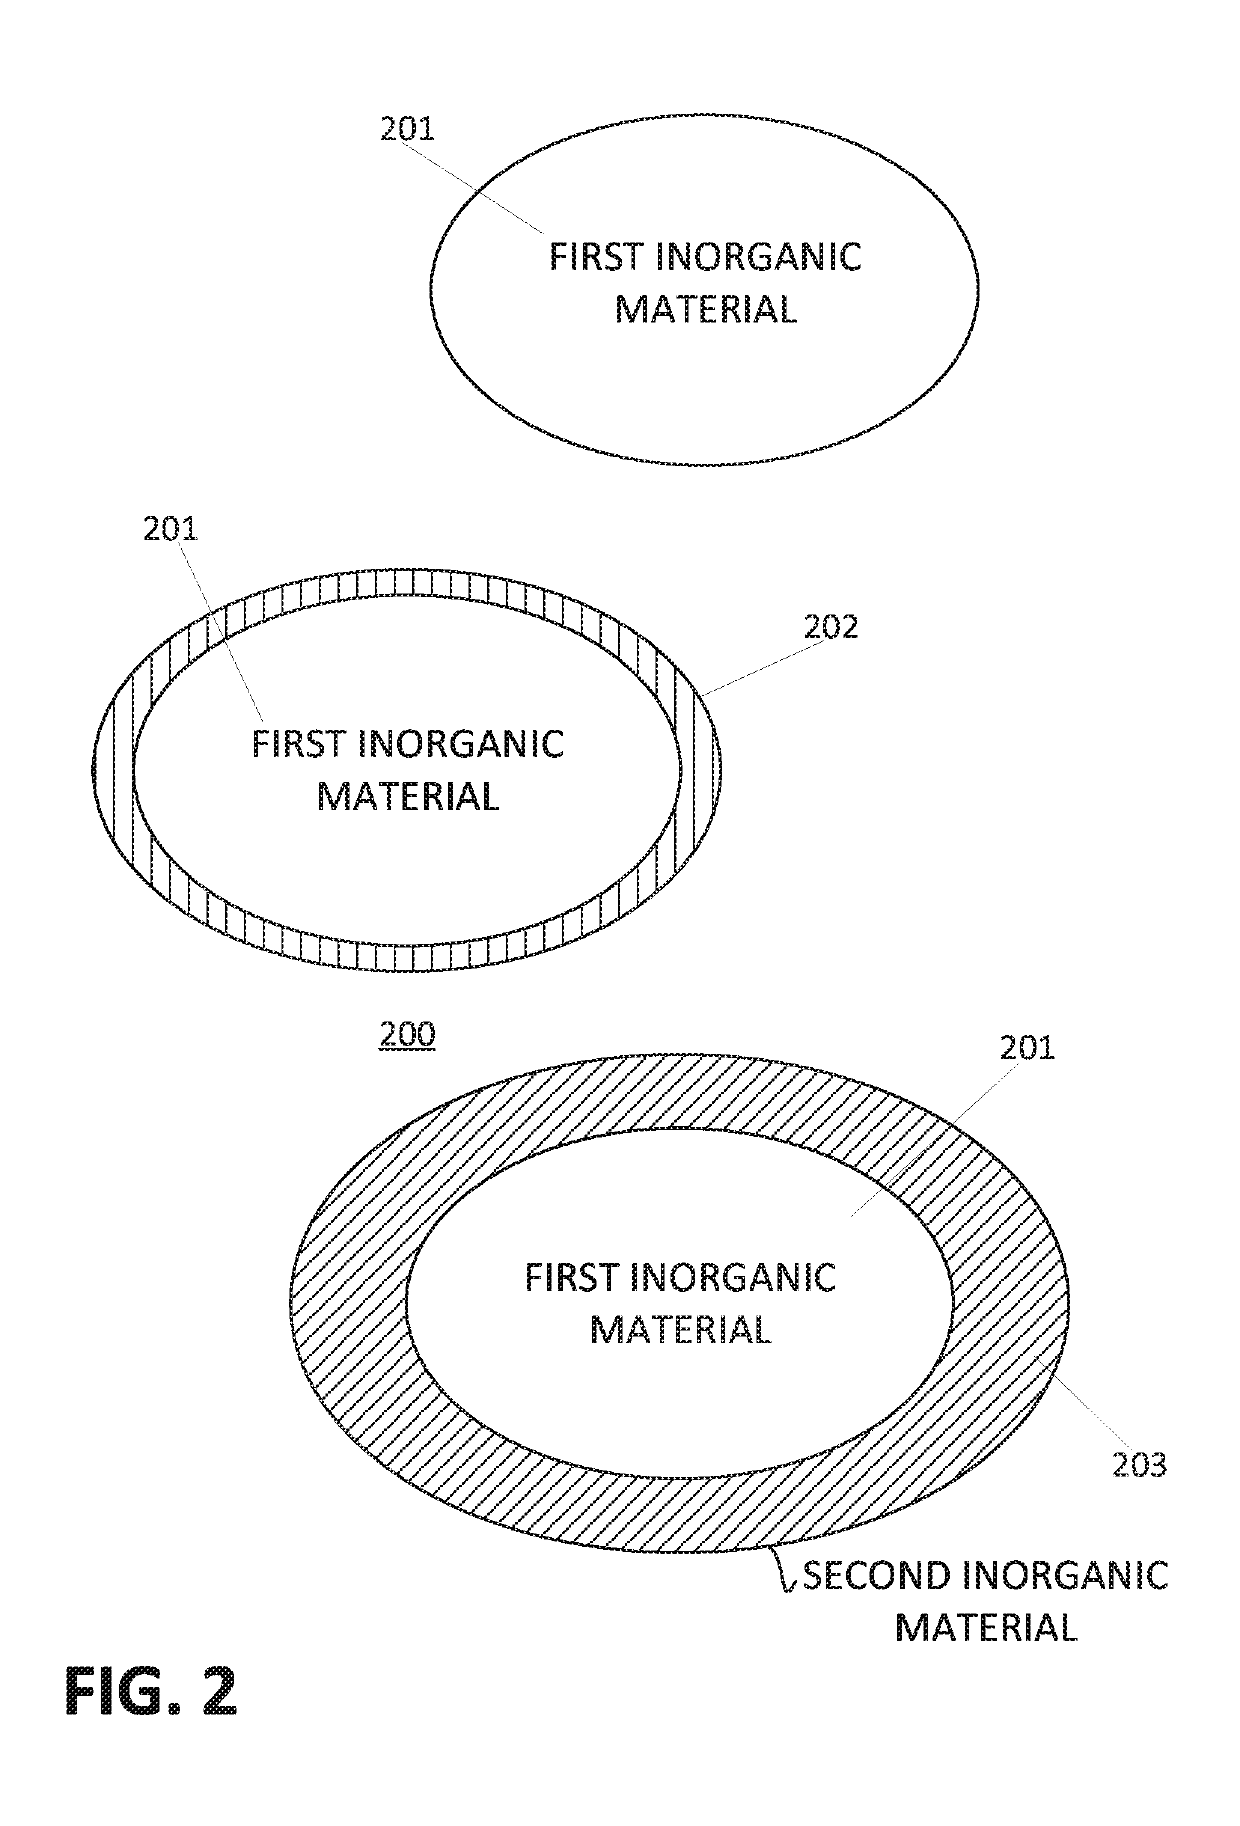 Coated inorganic materials and methods for forming the coated inorganic materials